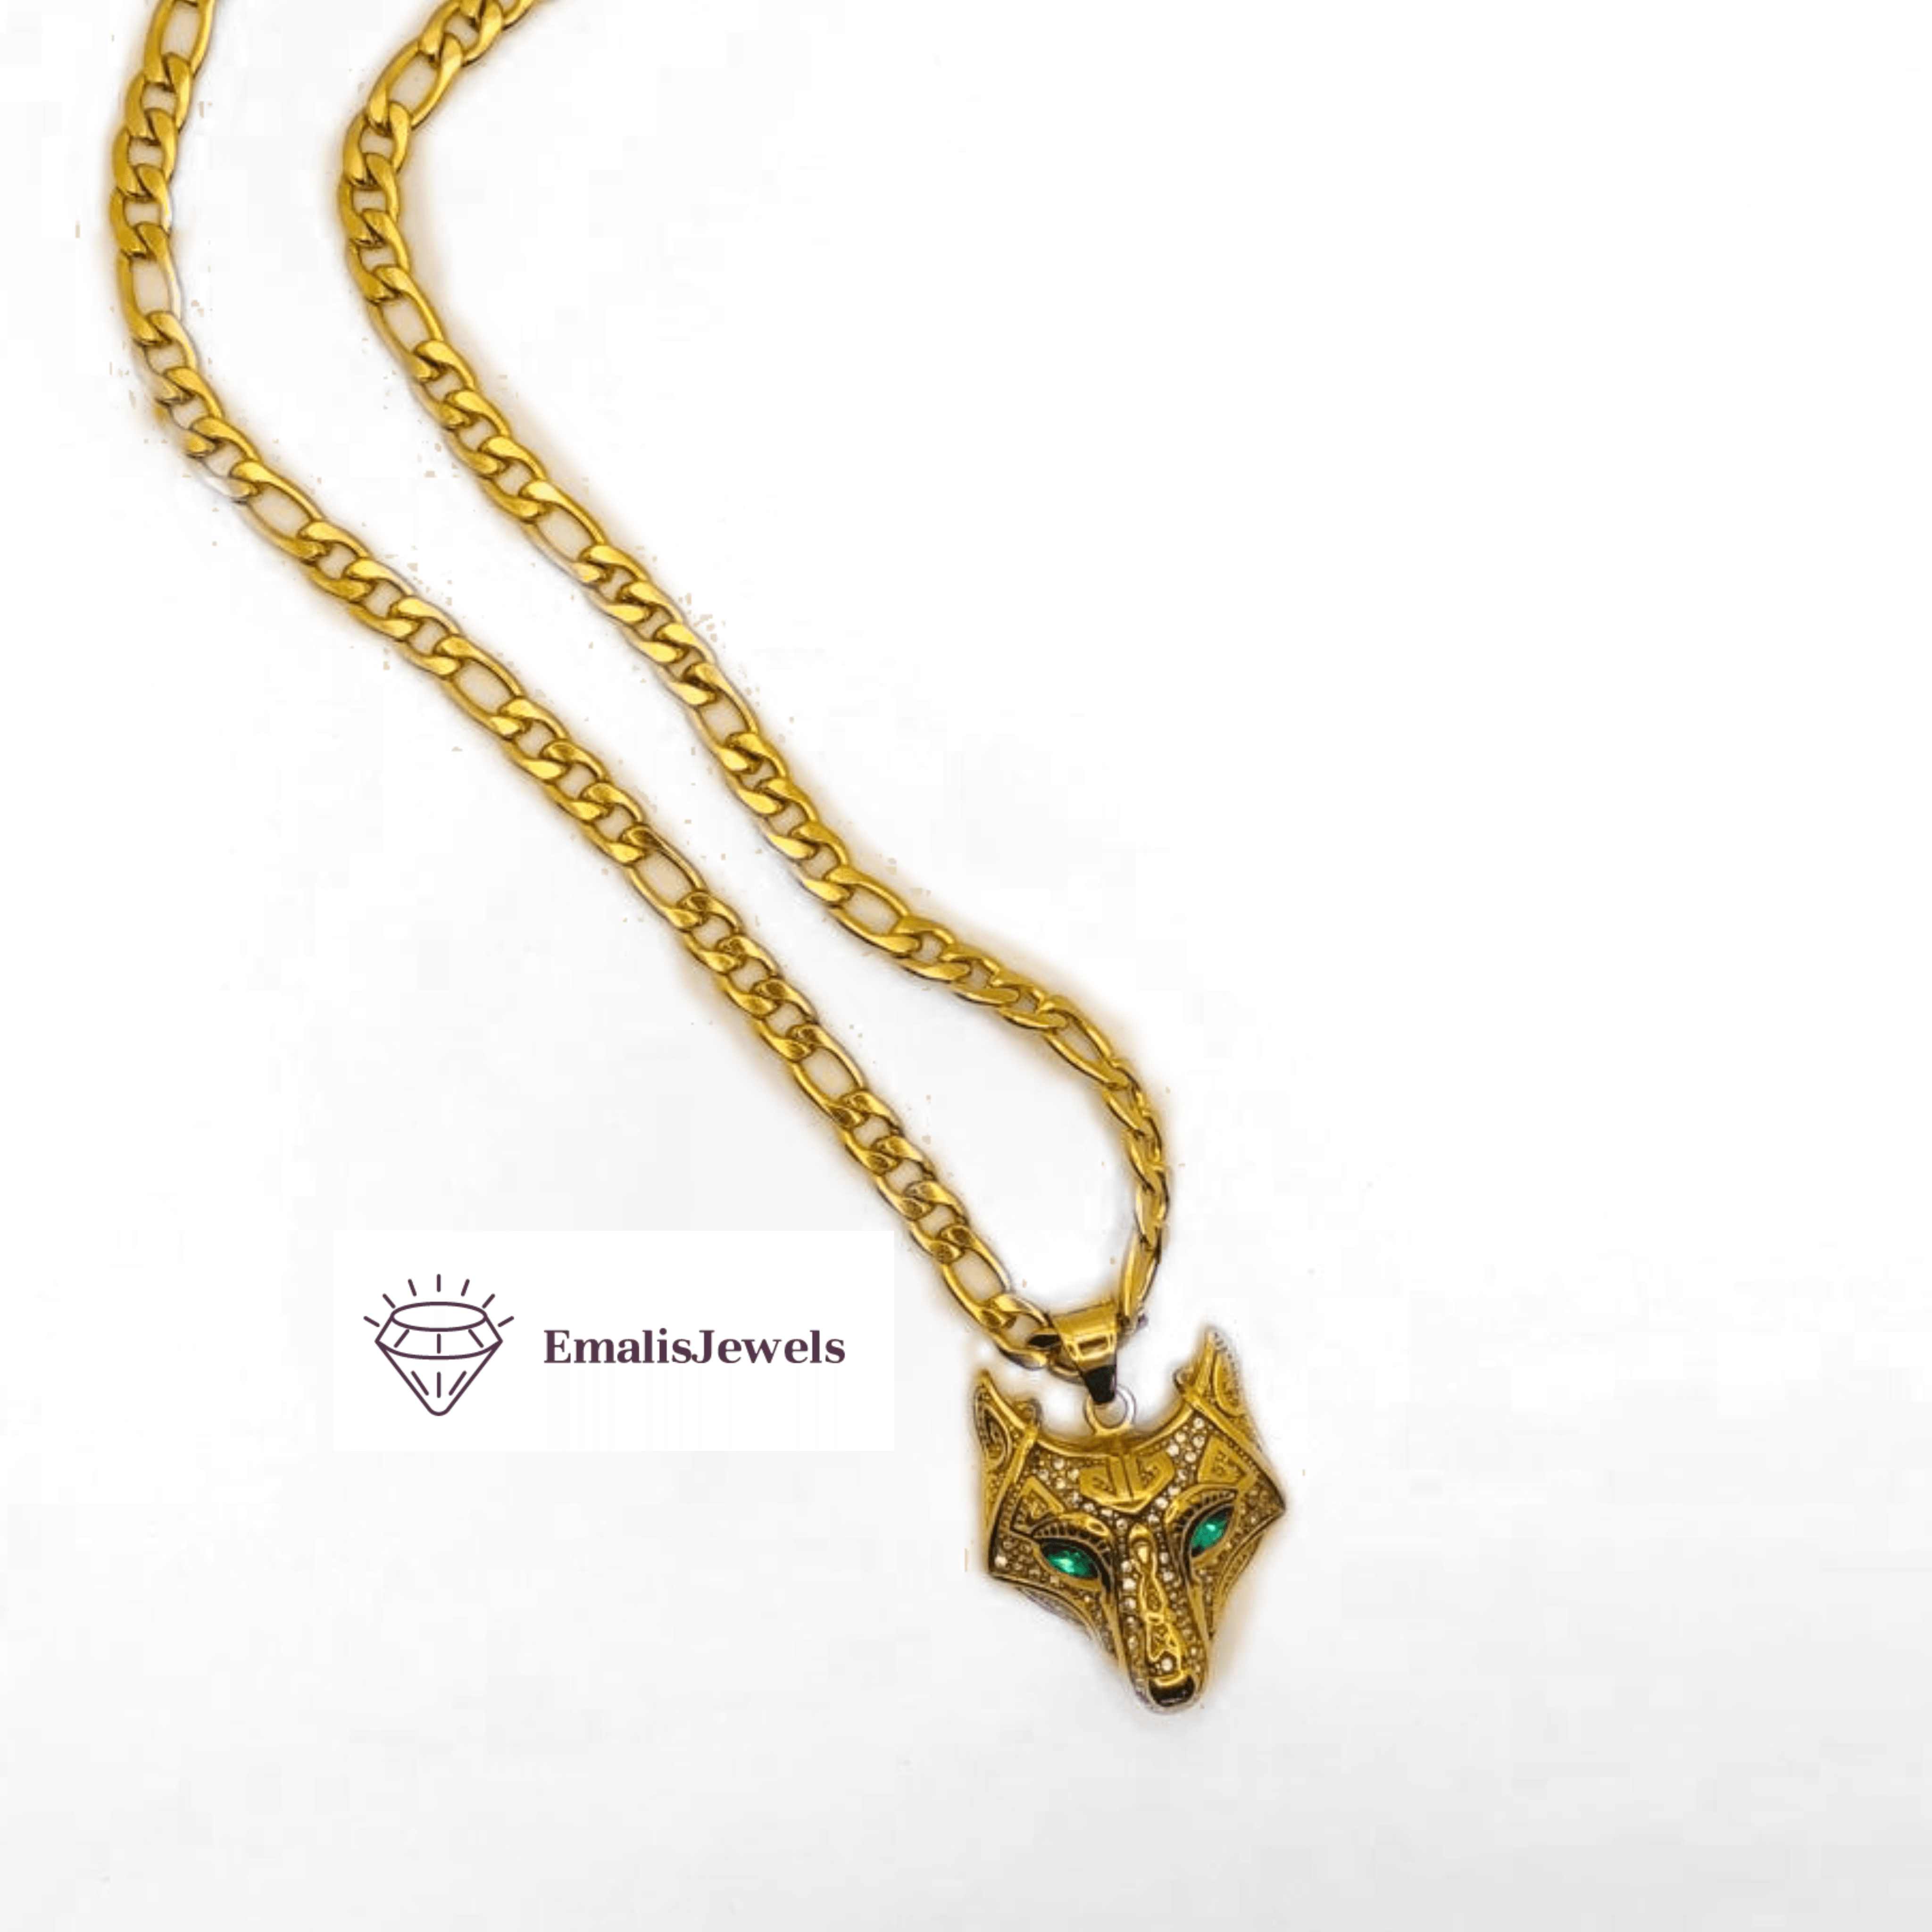 Stainless Steel Chain Necklace and Stainless Steel Gold Overlay Wolf Pendant